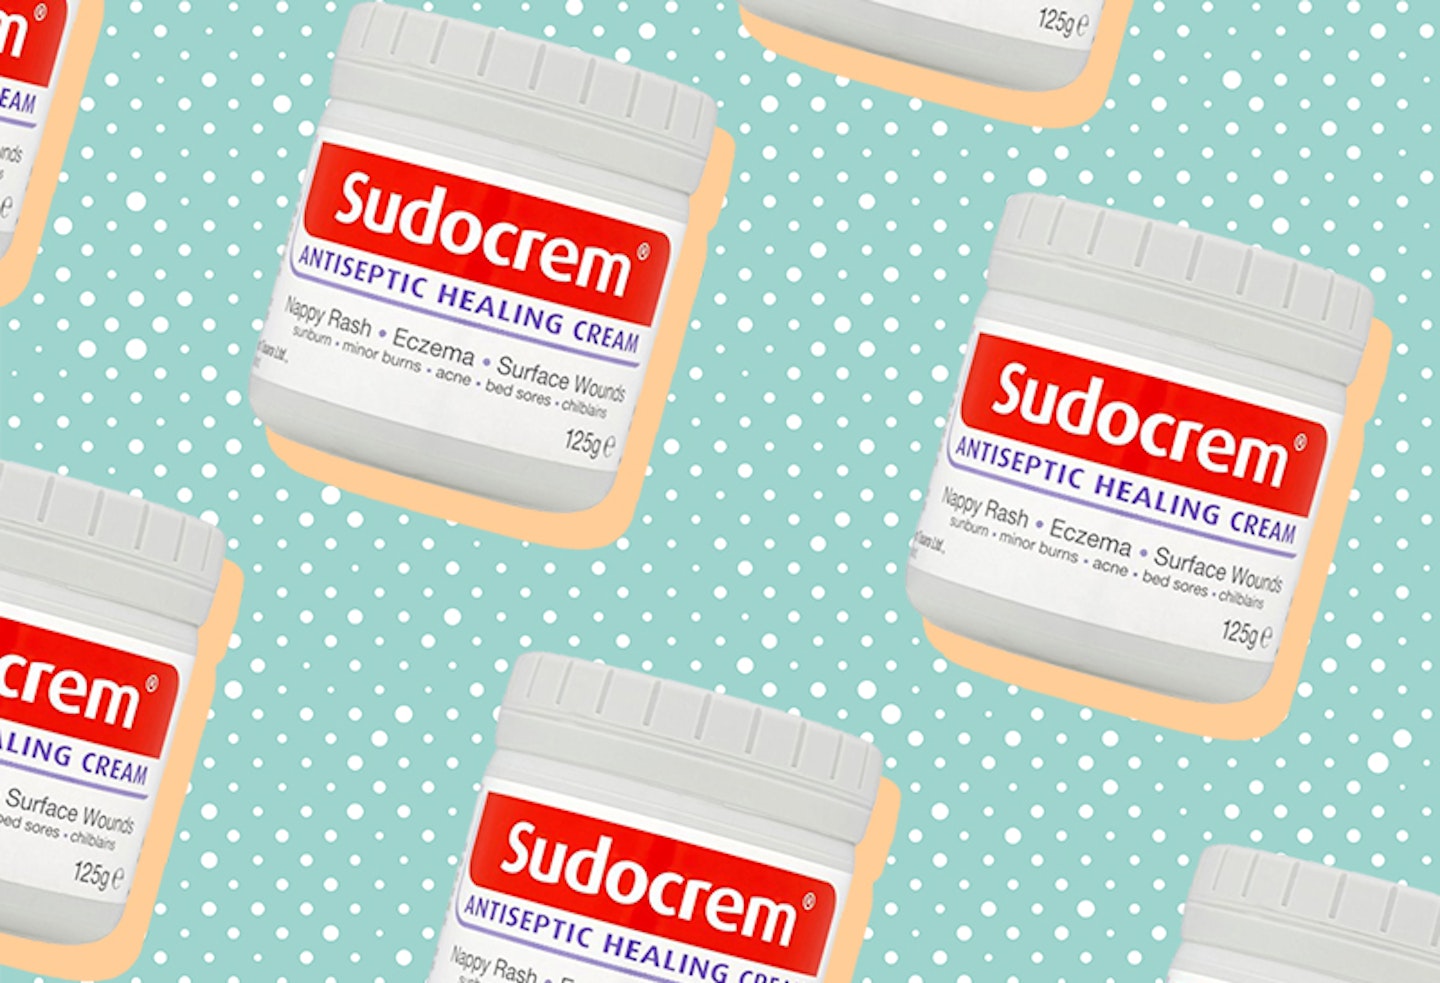 Sudocrem: Review and 10 Clever Alternative Uses (Review